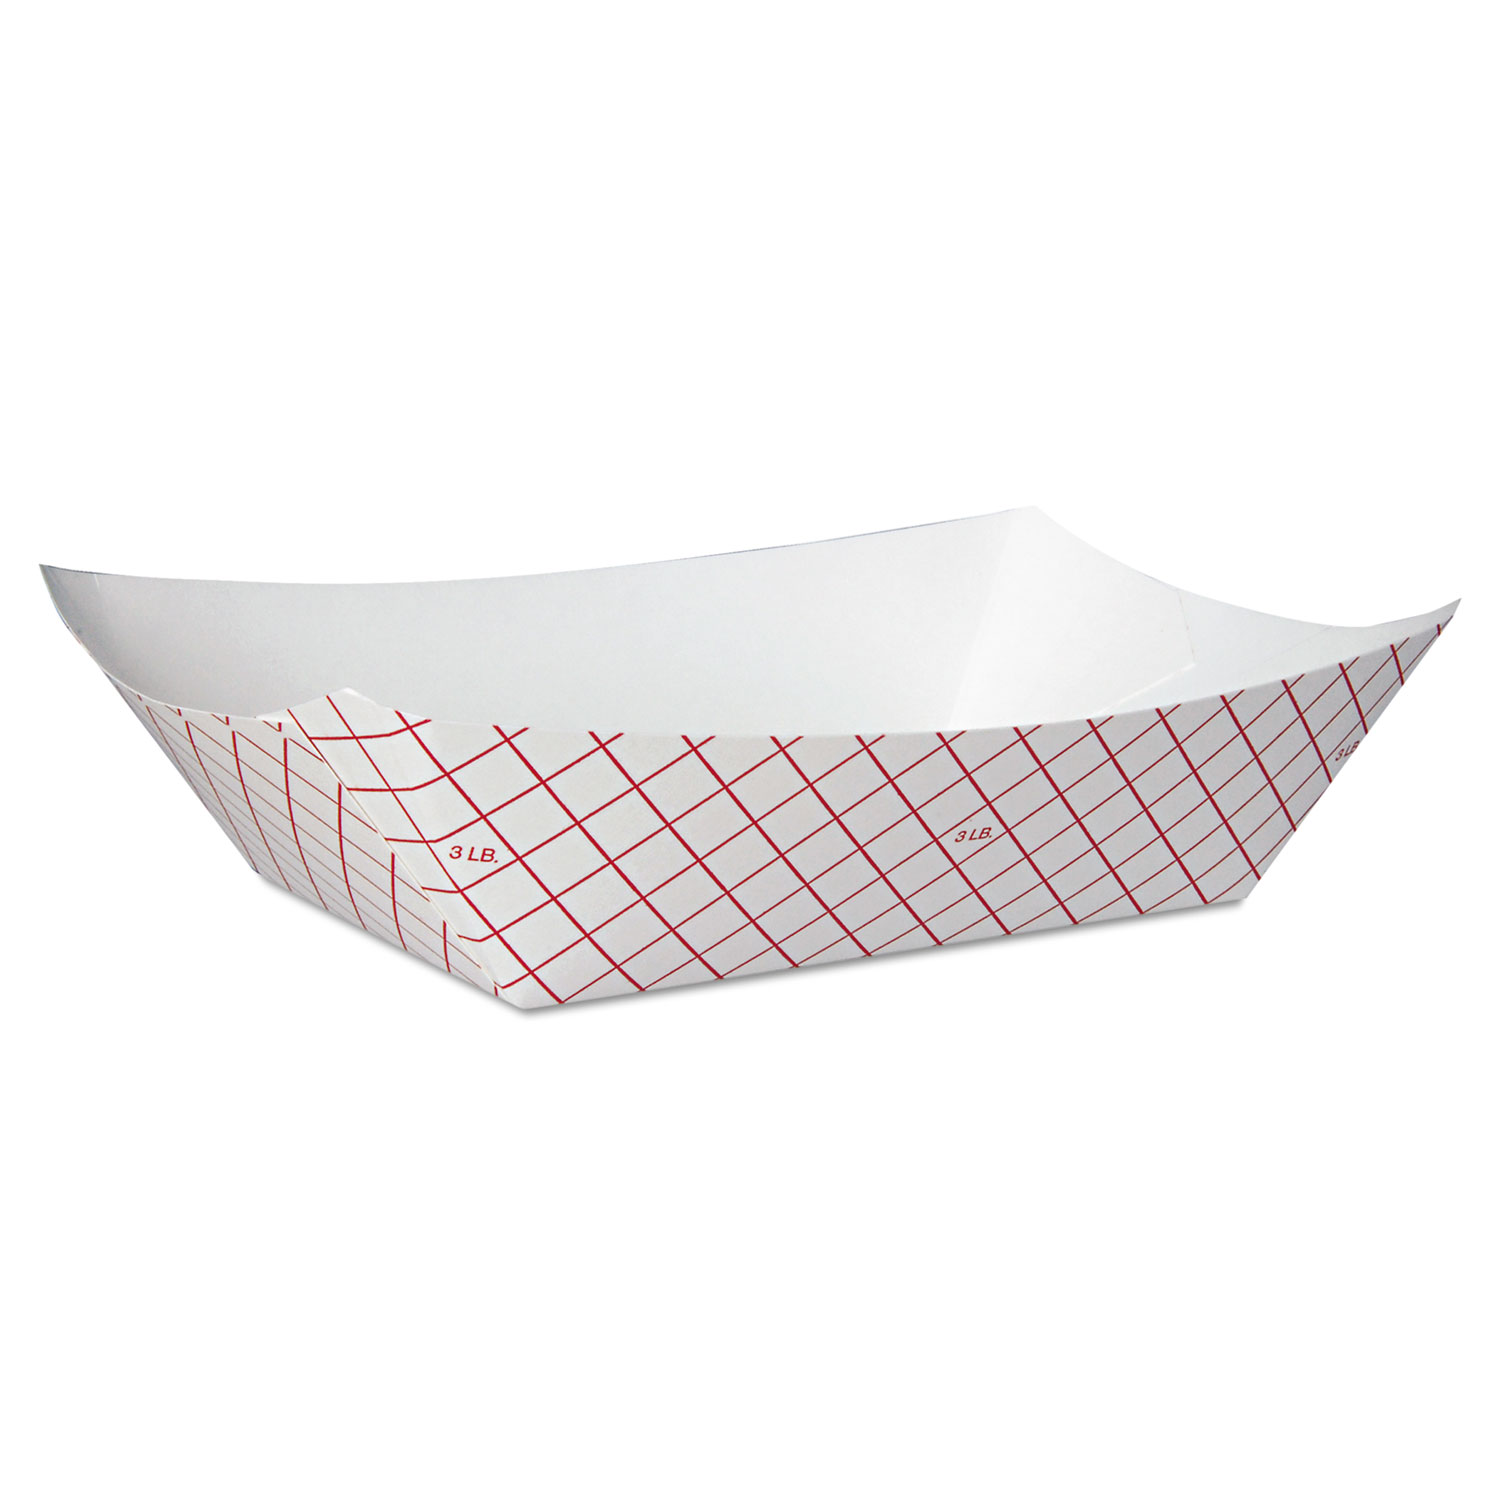  Dixie RP3008 Kant Leek Polycoated Paper Food Tray, Red Plaid, 250/Bag, 2/CT (DXERP3008) 